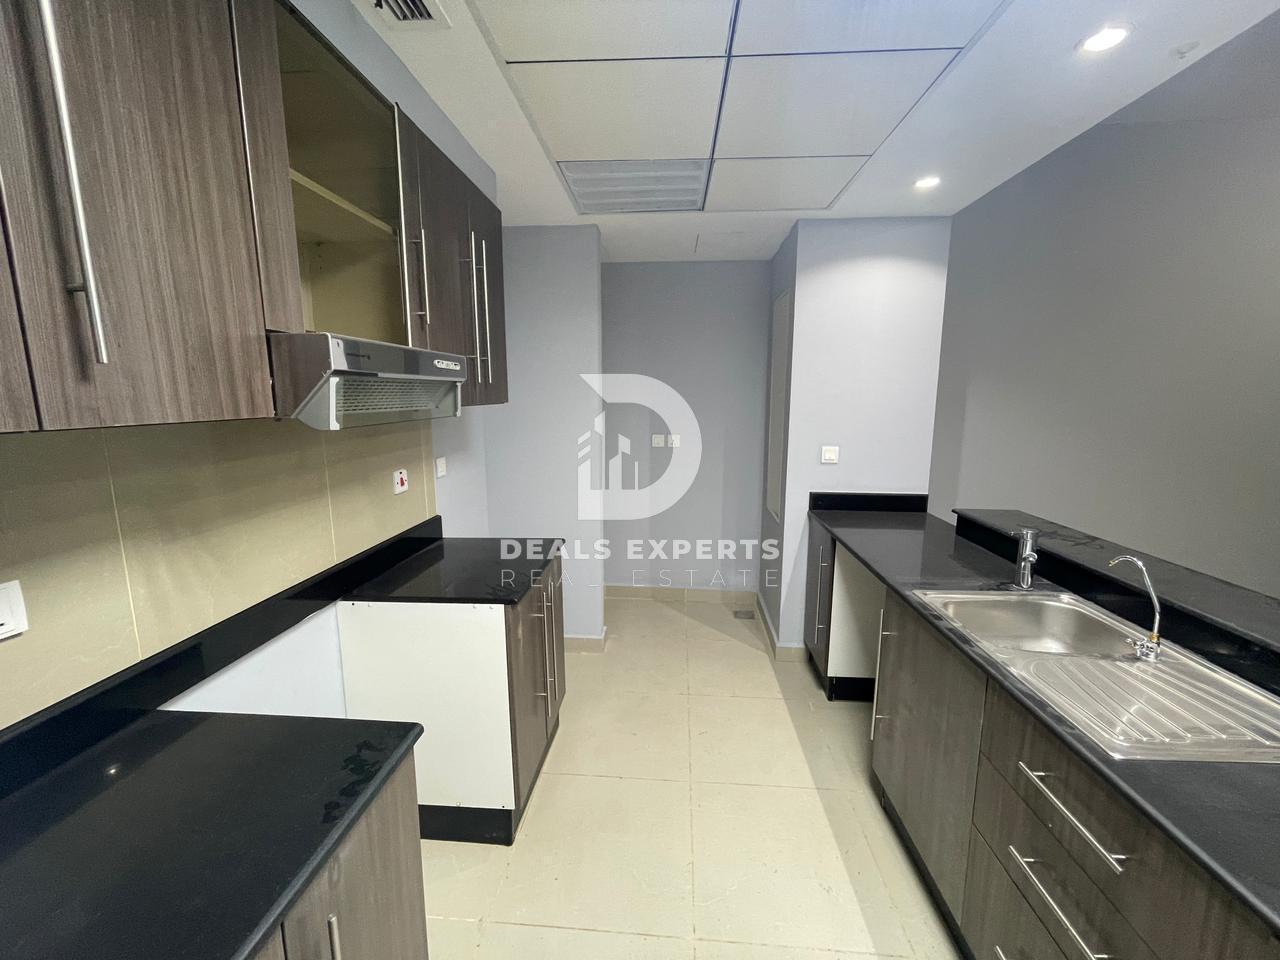 2 bed, 2 bath Apartment for rent in Tower 41, Al Reef Downtown, Al Reef, Abu Dhabi for price AED 55000 yearly 